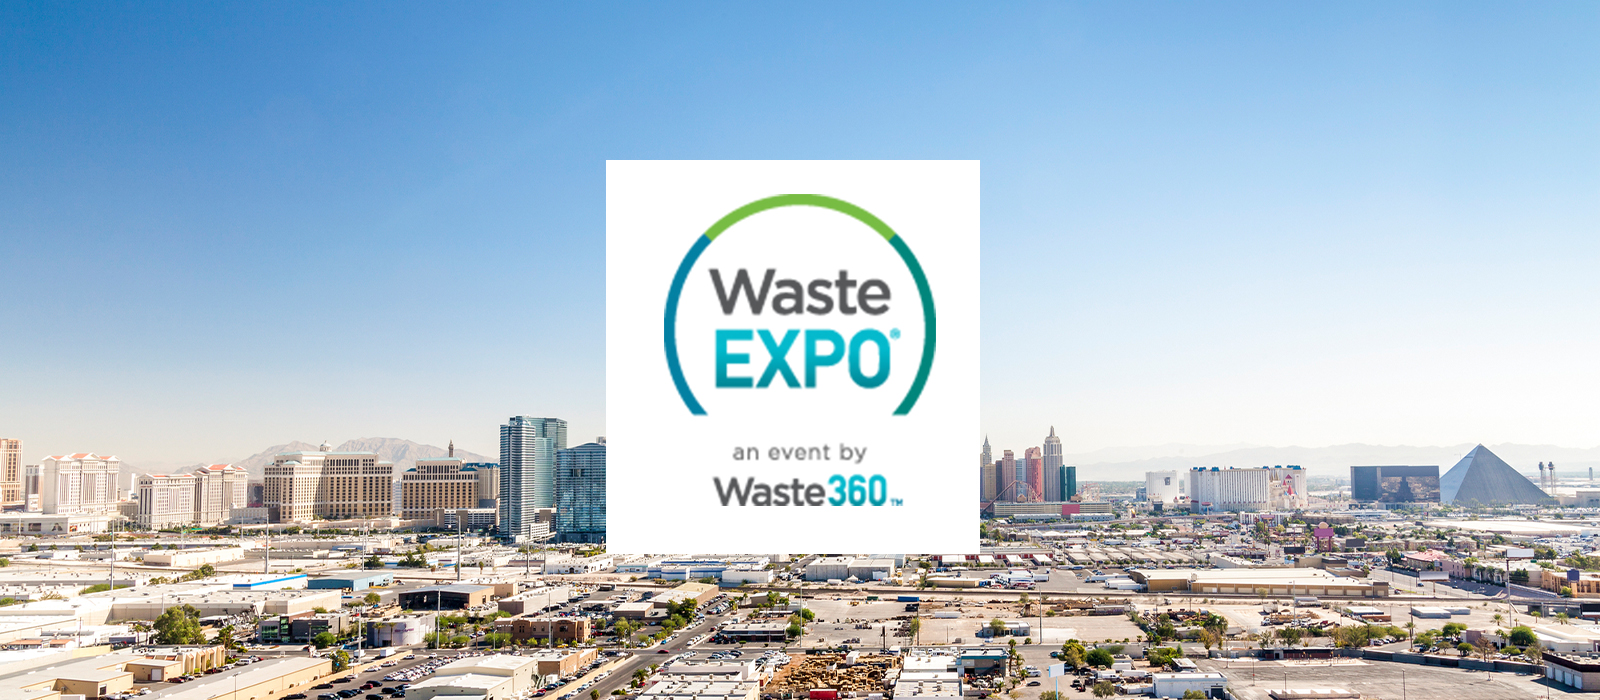 The Best Exhibition Stand Builders for Trade Shows in Waste Expo 2023 Las Vegas, USA